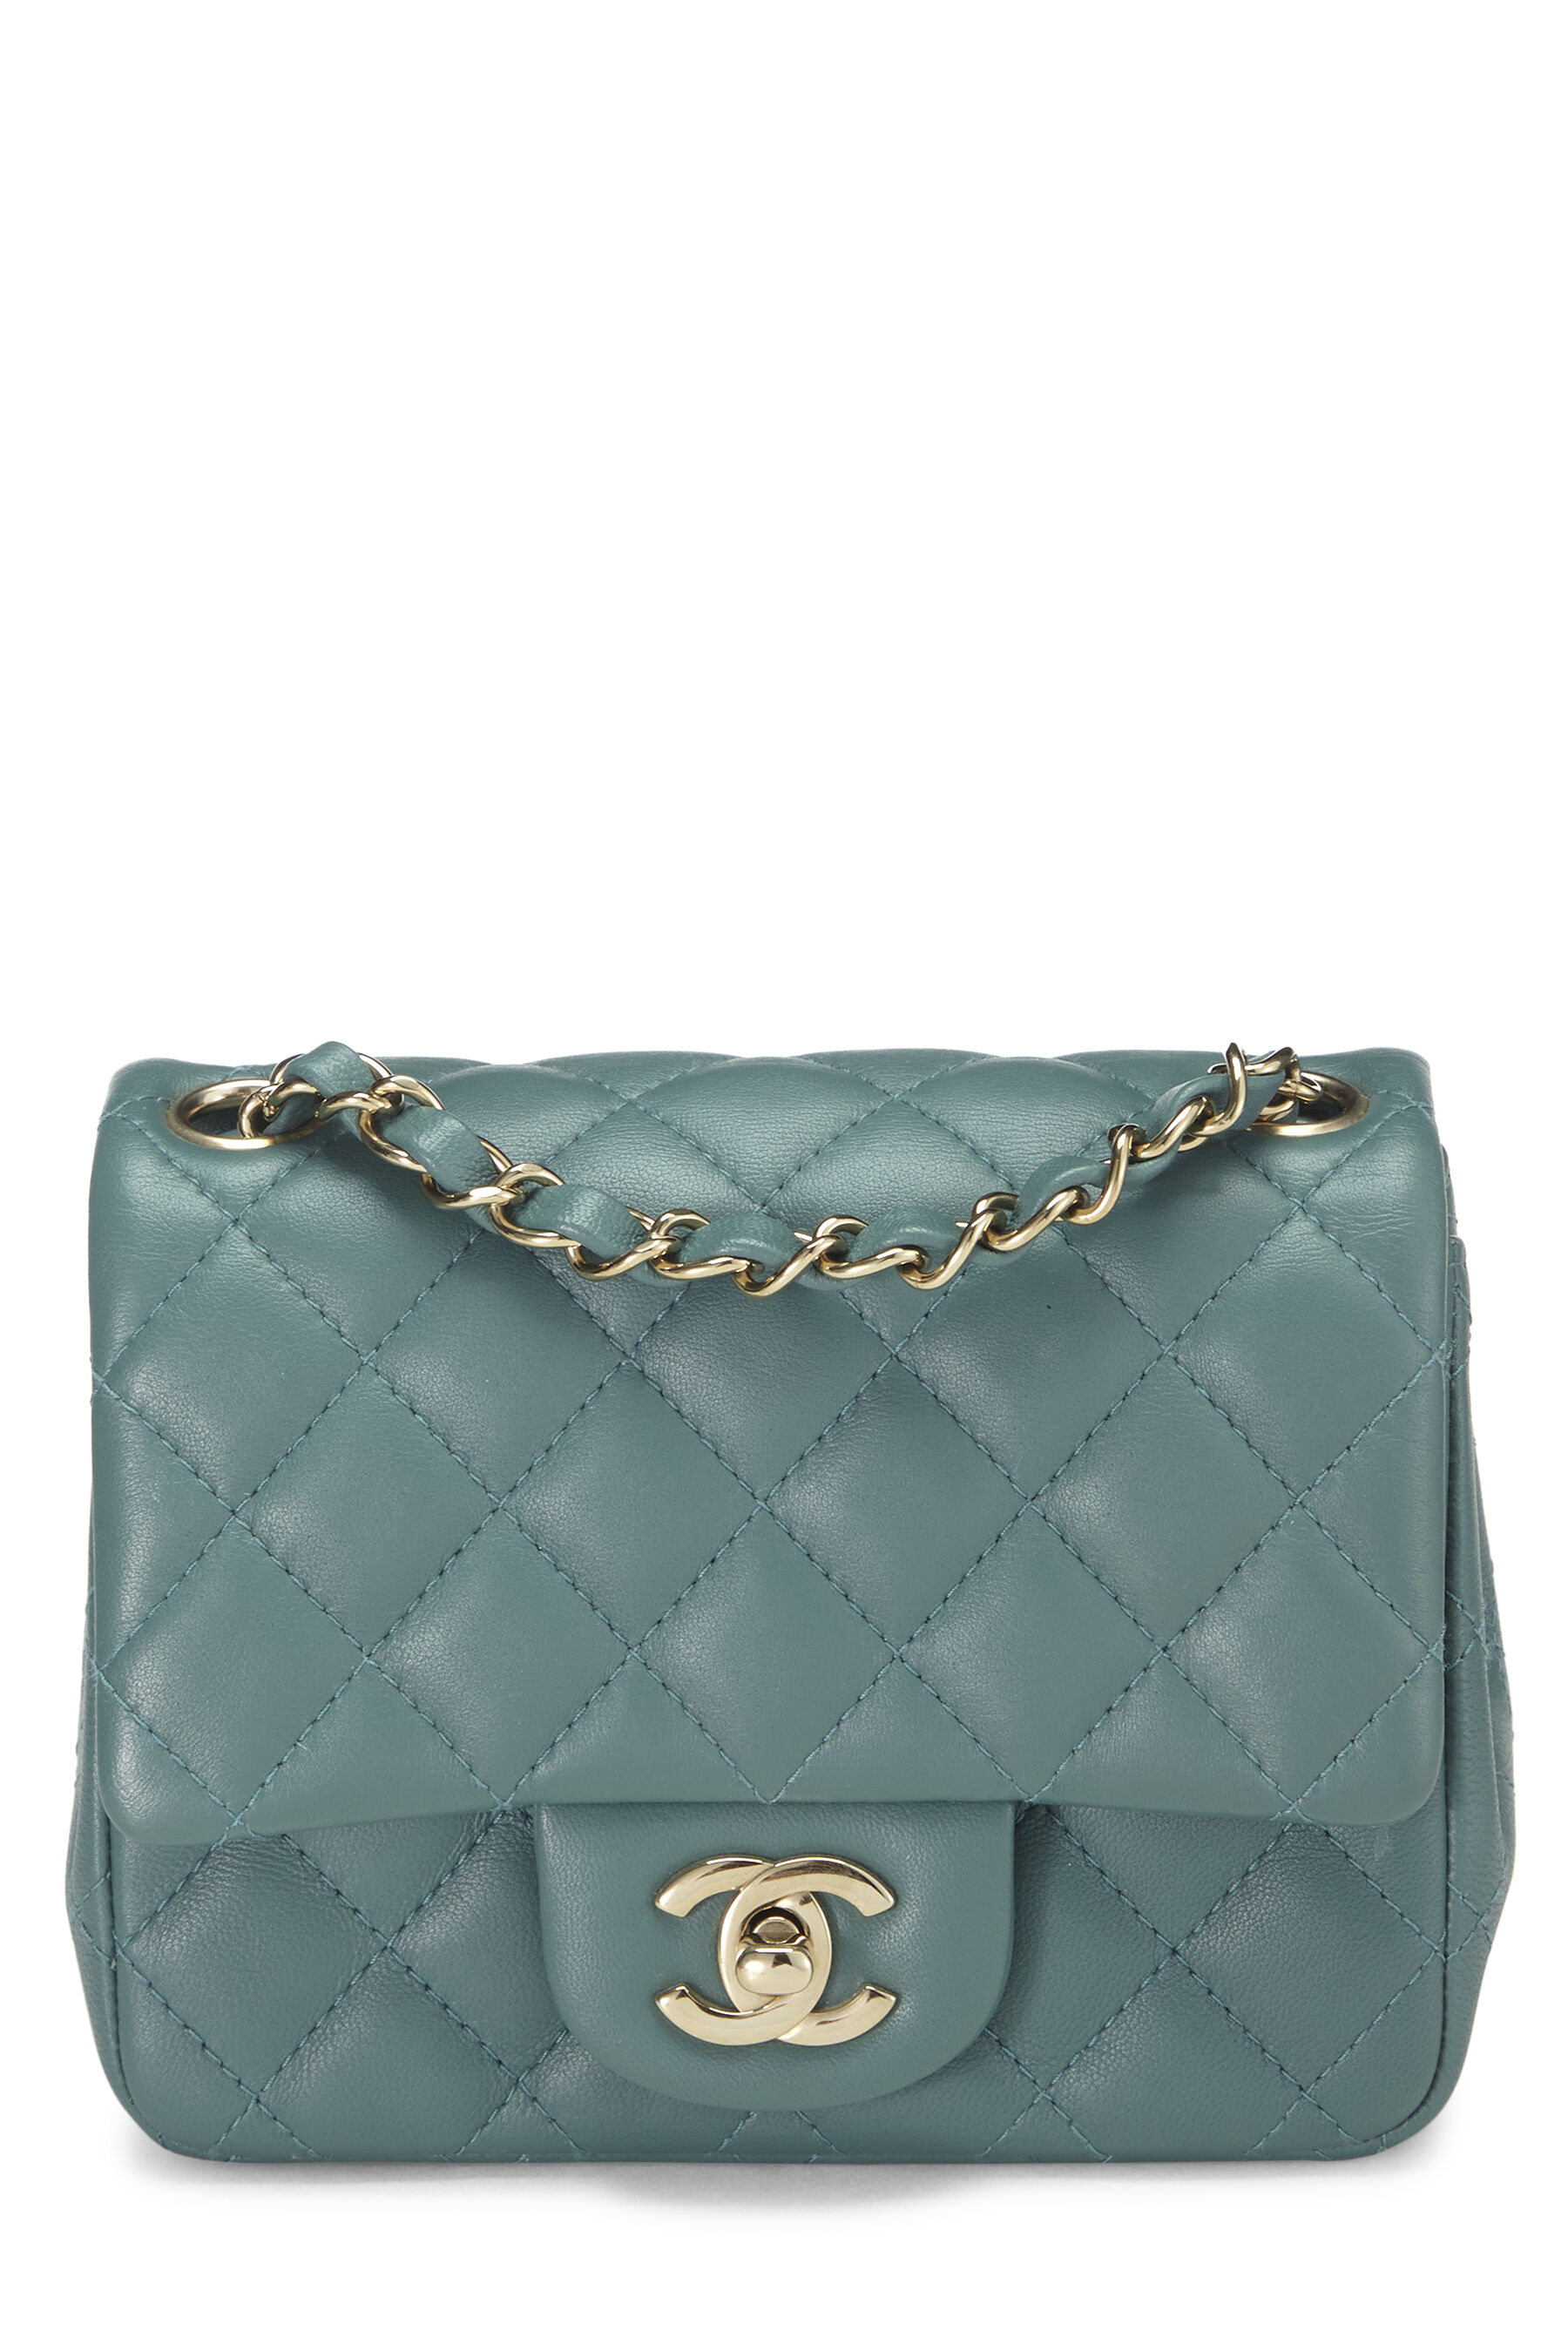 Chanel - Green Quilted Lambskin Classic Square Flap Mini